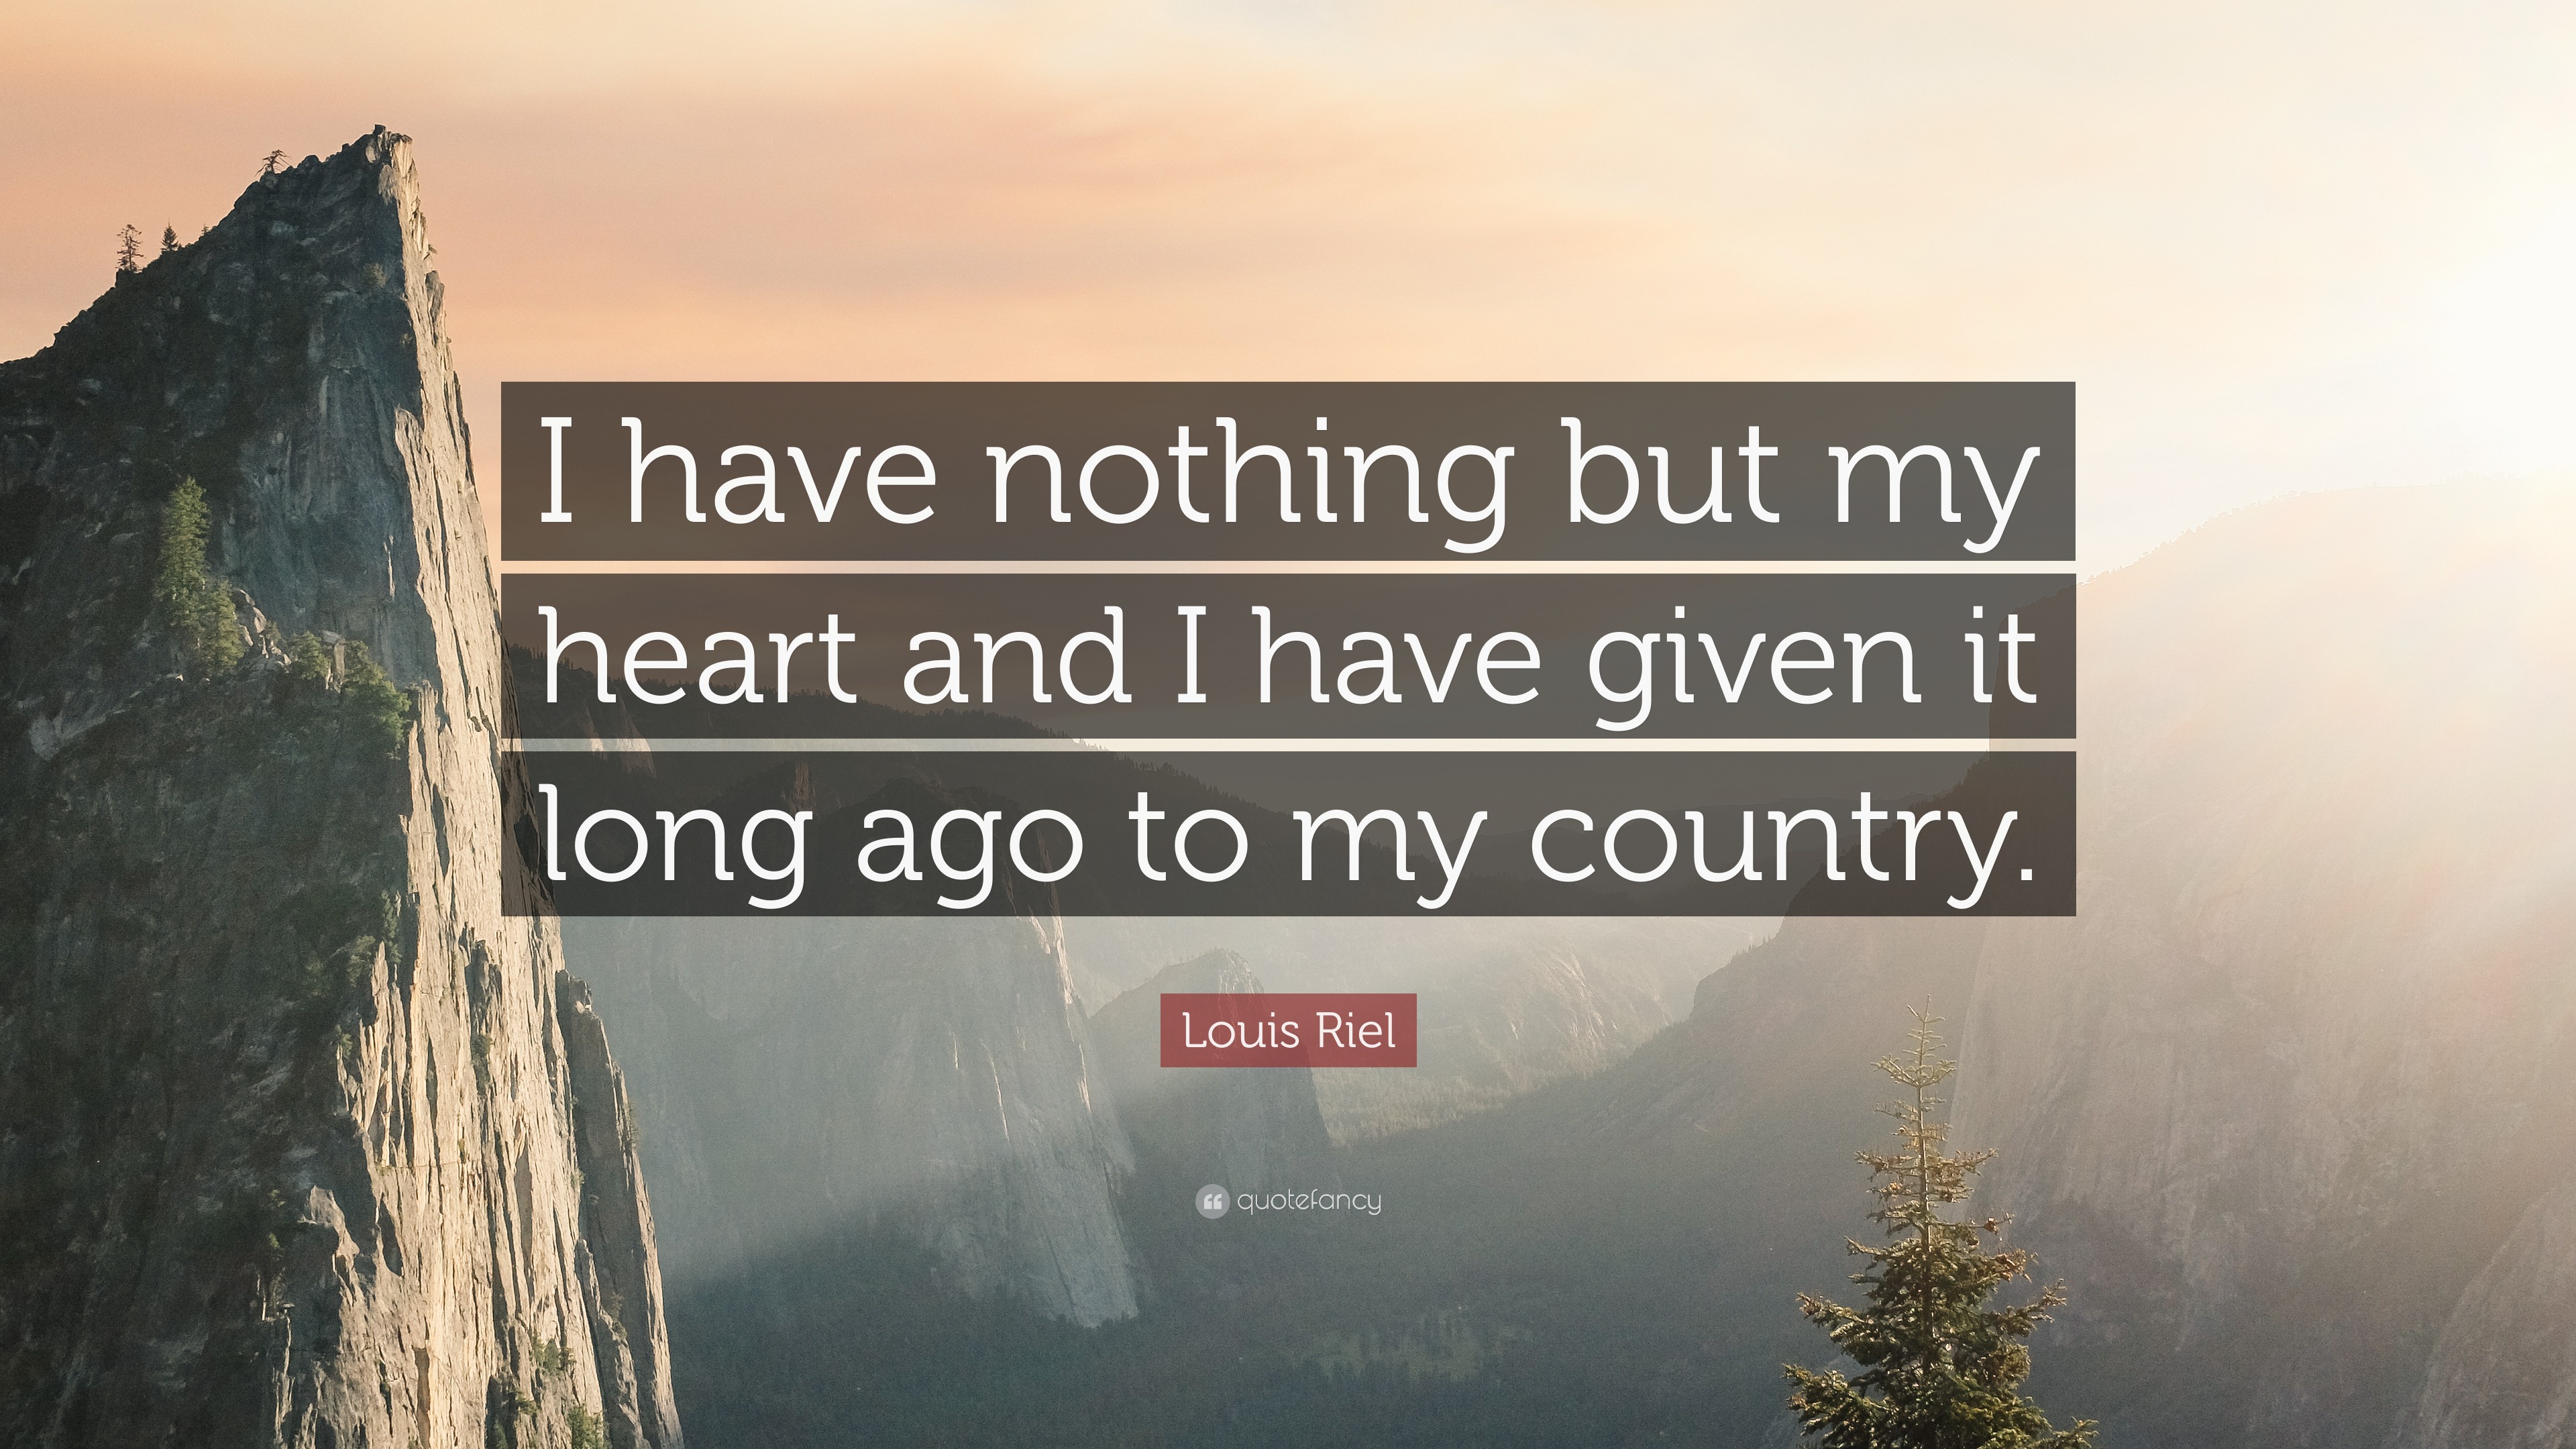 Louis Riel Quote: “I have nothing but my heart and I have given it long